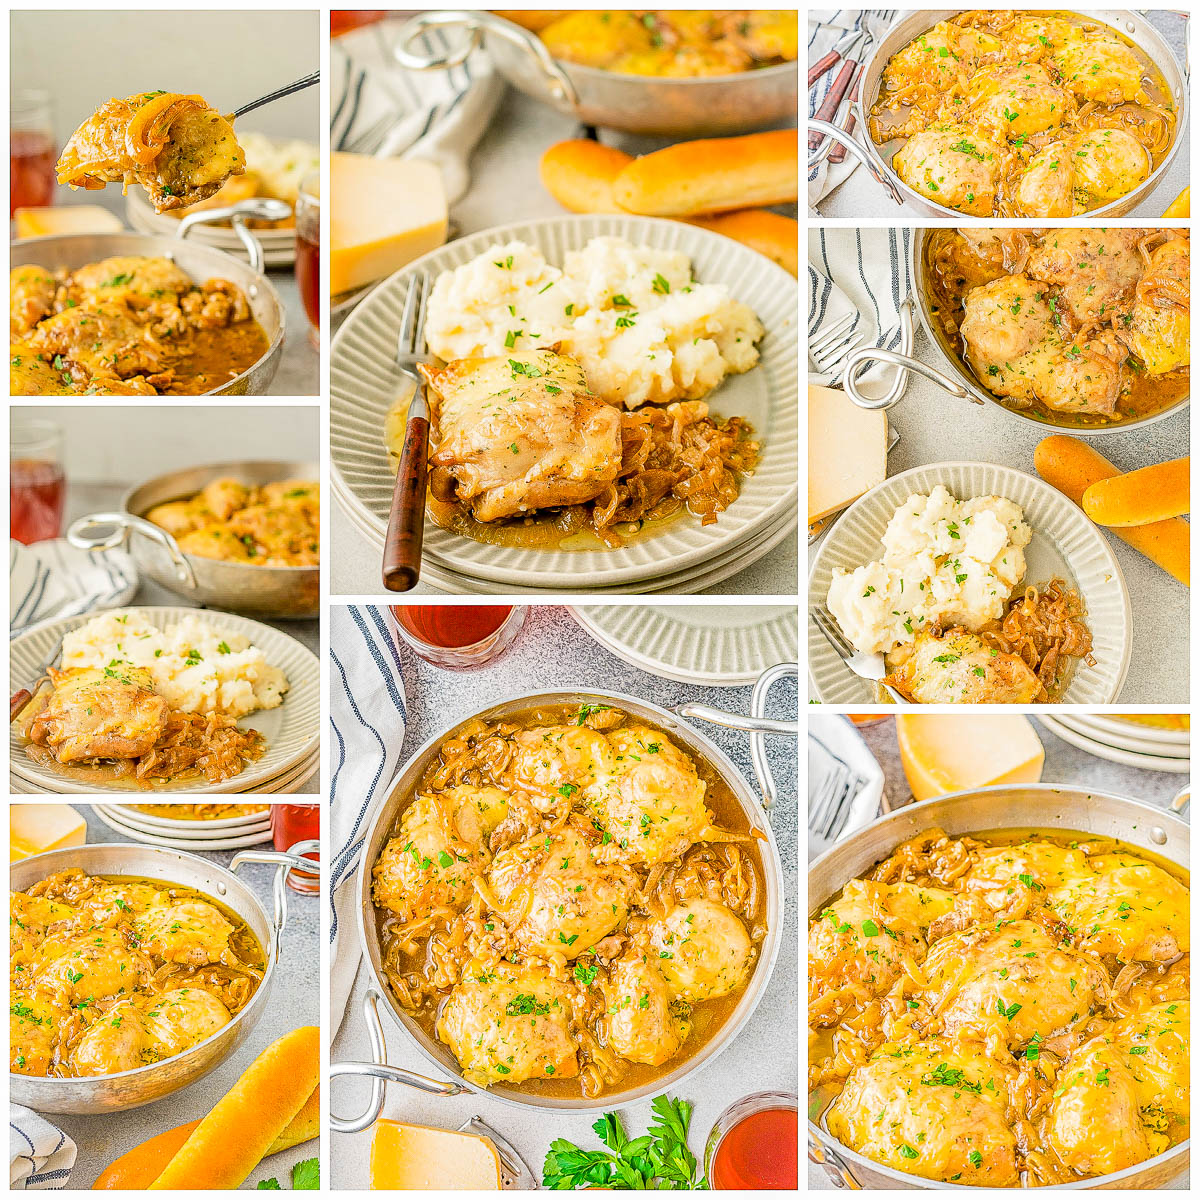 French Onion Chicken- If you like French onion soup, you're going to LOVE this elegant chicken dinner complete with caramelized onions and melted cheese on top! A PERFECT comfort food recipe for special occasions like a holiday meal, an anniversary or Valentine's dinner, or anytime you want to take chicken to the next level! Rave reviews guaranteed! 